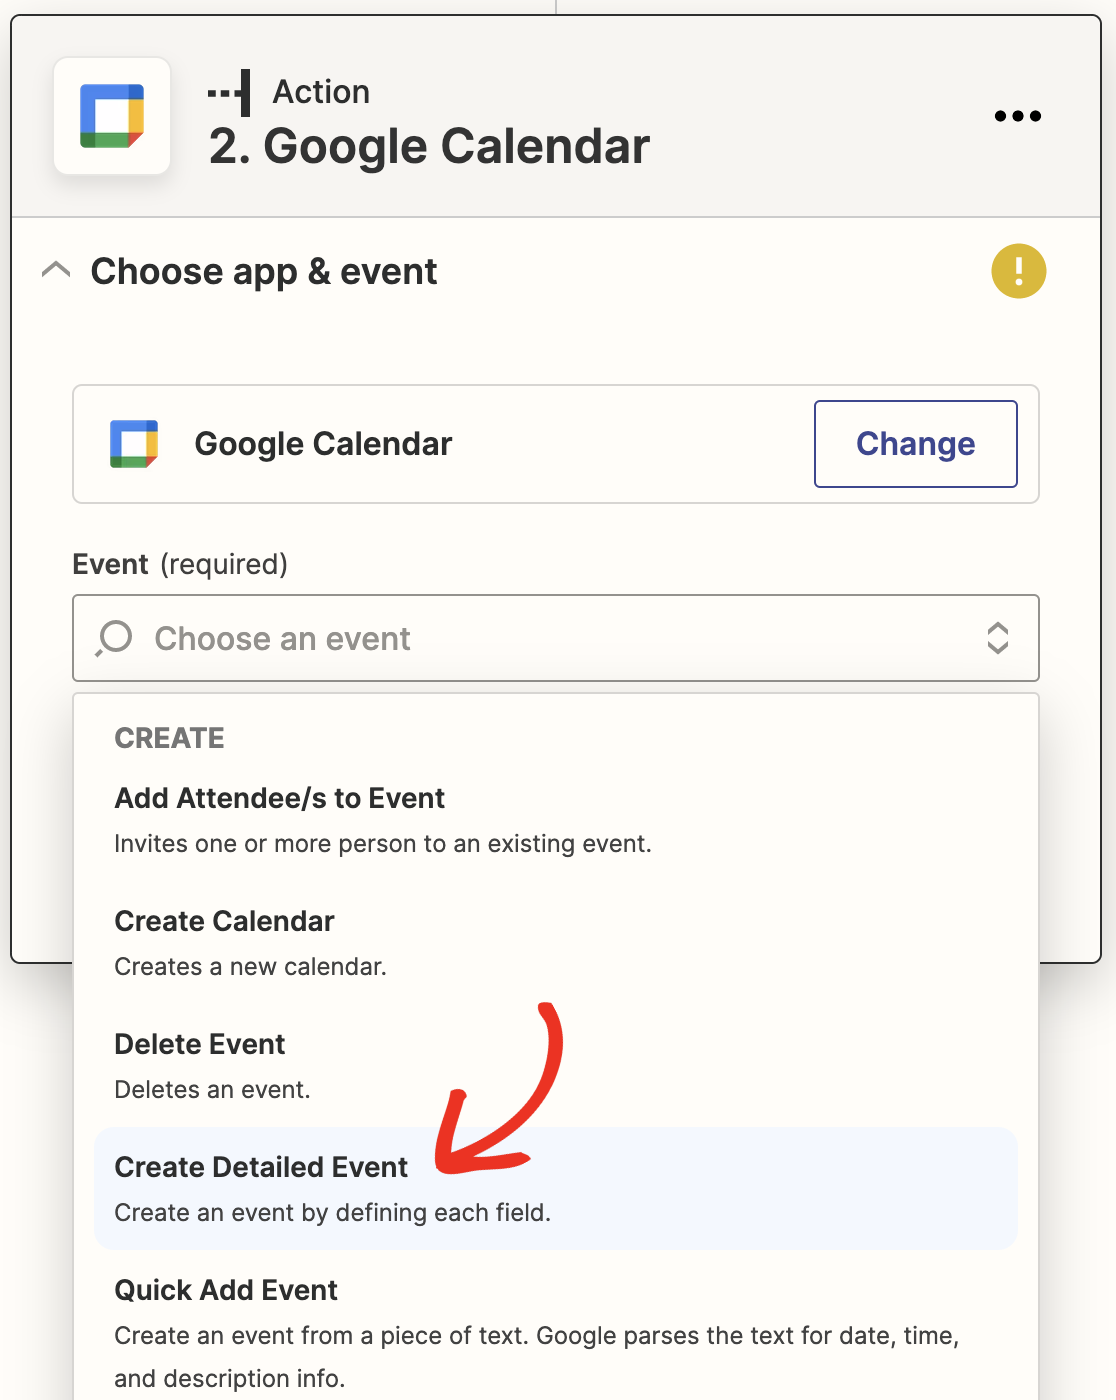 Selecting Create Detailed Event as the action event in Zapier